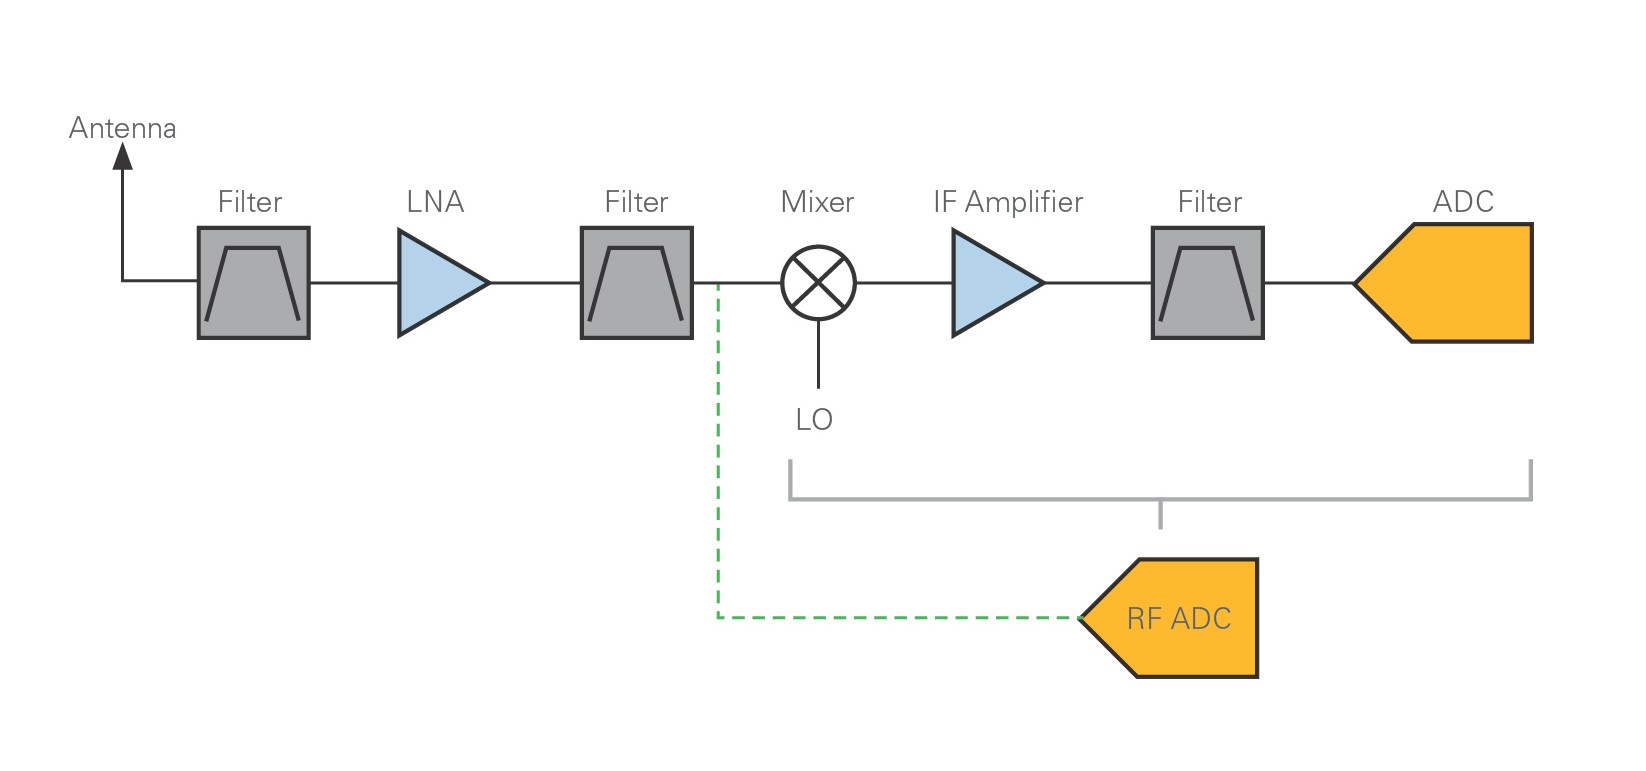 This heterodyne receiver block diagram shows an instrument with an RF front end that consists of a bandpass filter, low-noise amplifier, mixer, and local oscillator